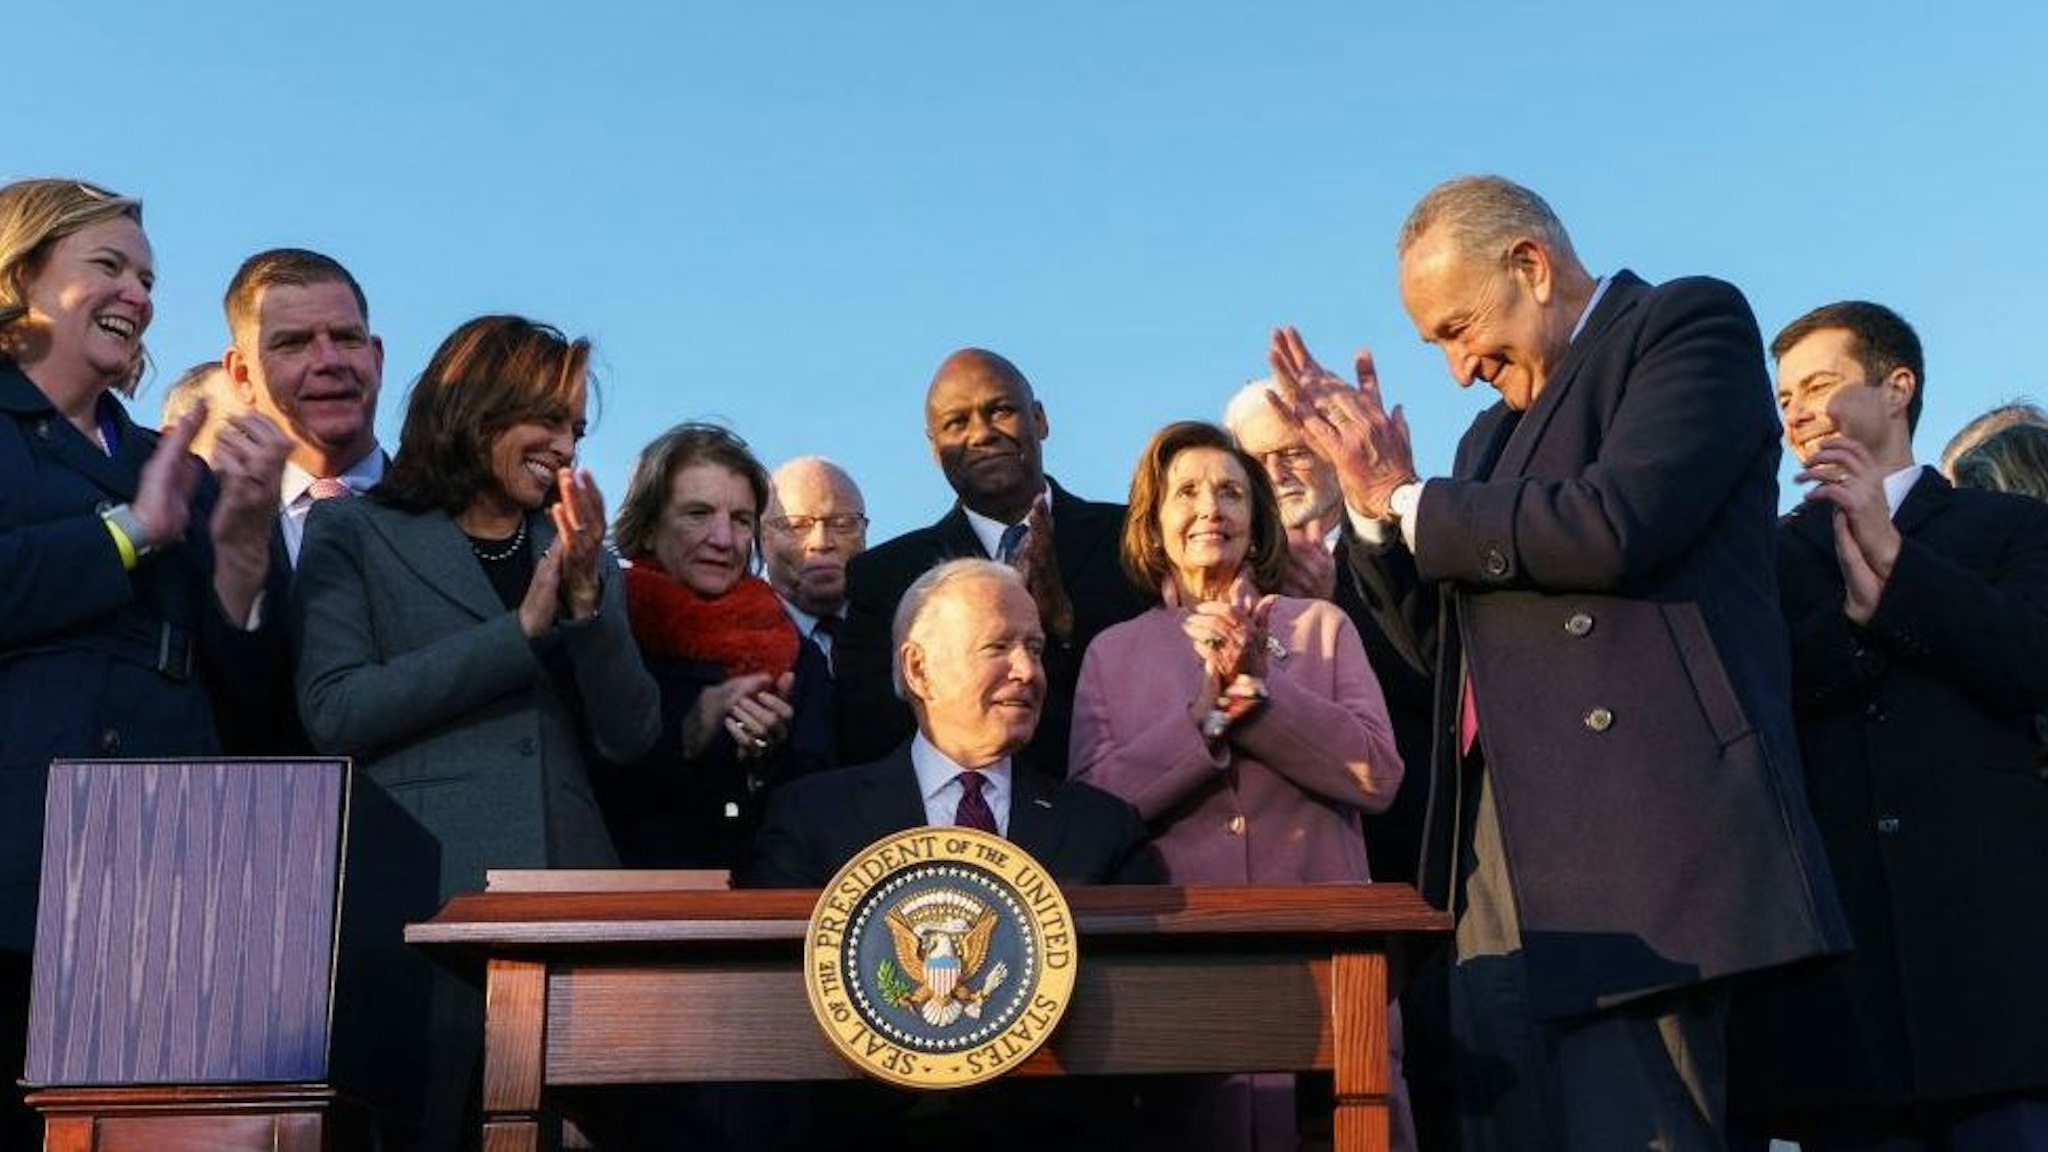 US President Joe Biden (C), flanked by Vice President Kamala Harris, takes part in a signing ceremony for H.R. 3684, the Infrastructure Investment and Jobs Act on the South Lawn of the White House in Washington, DC on November 15, 2021.